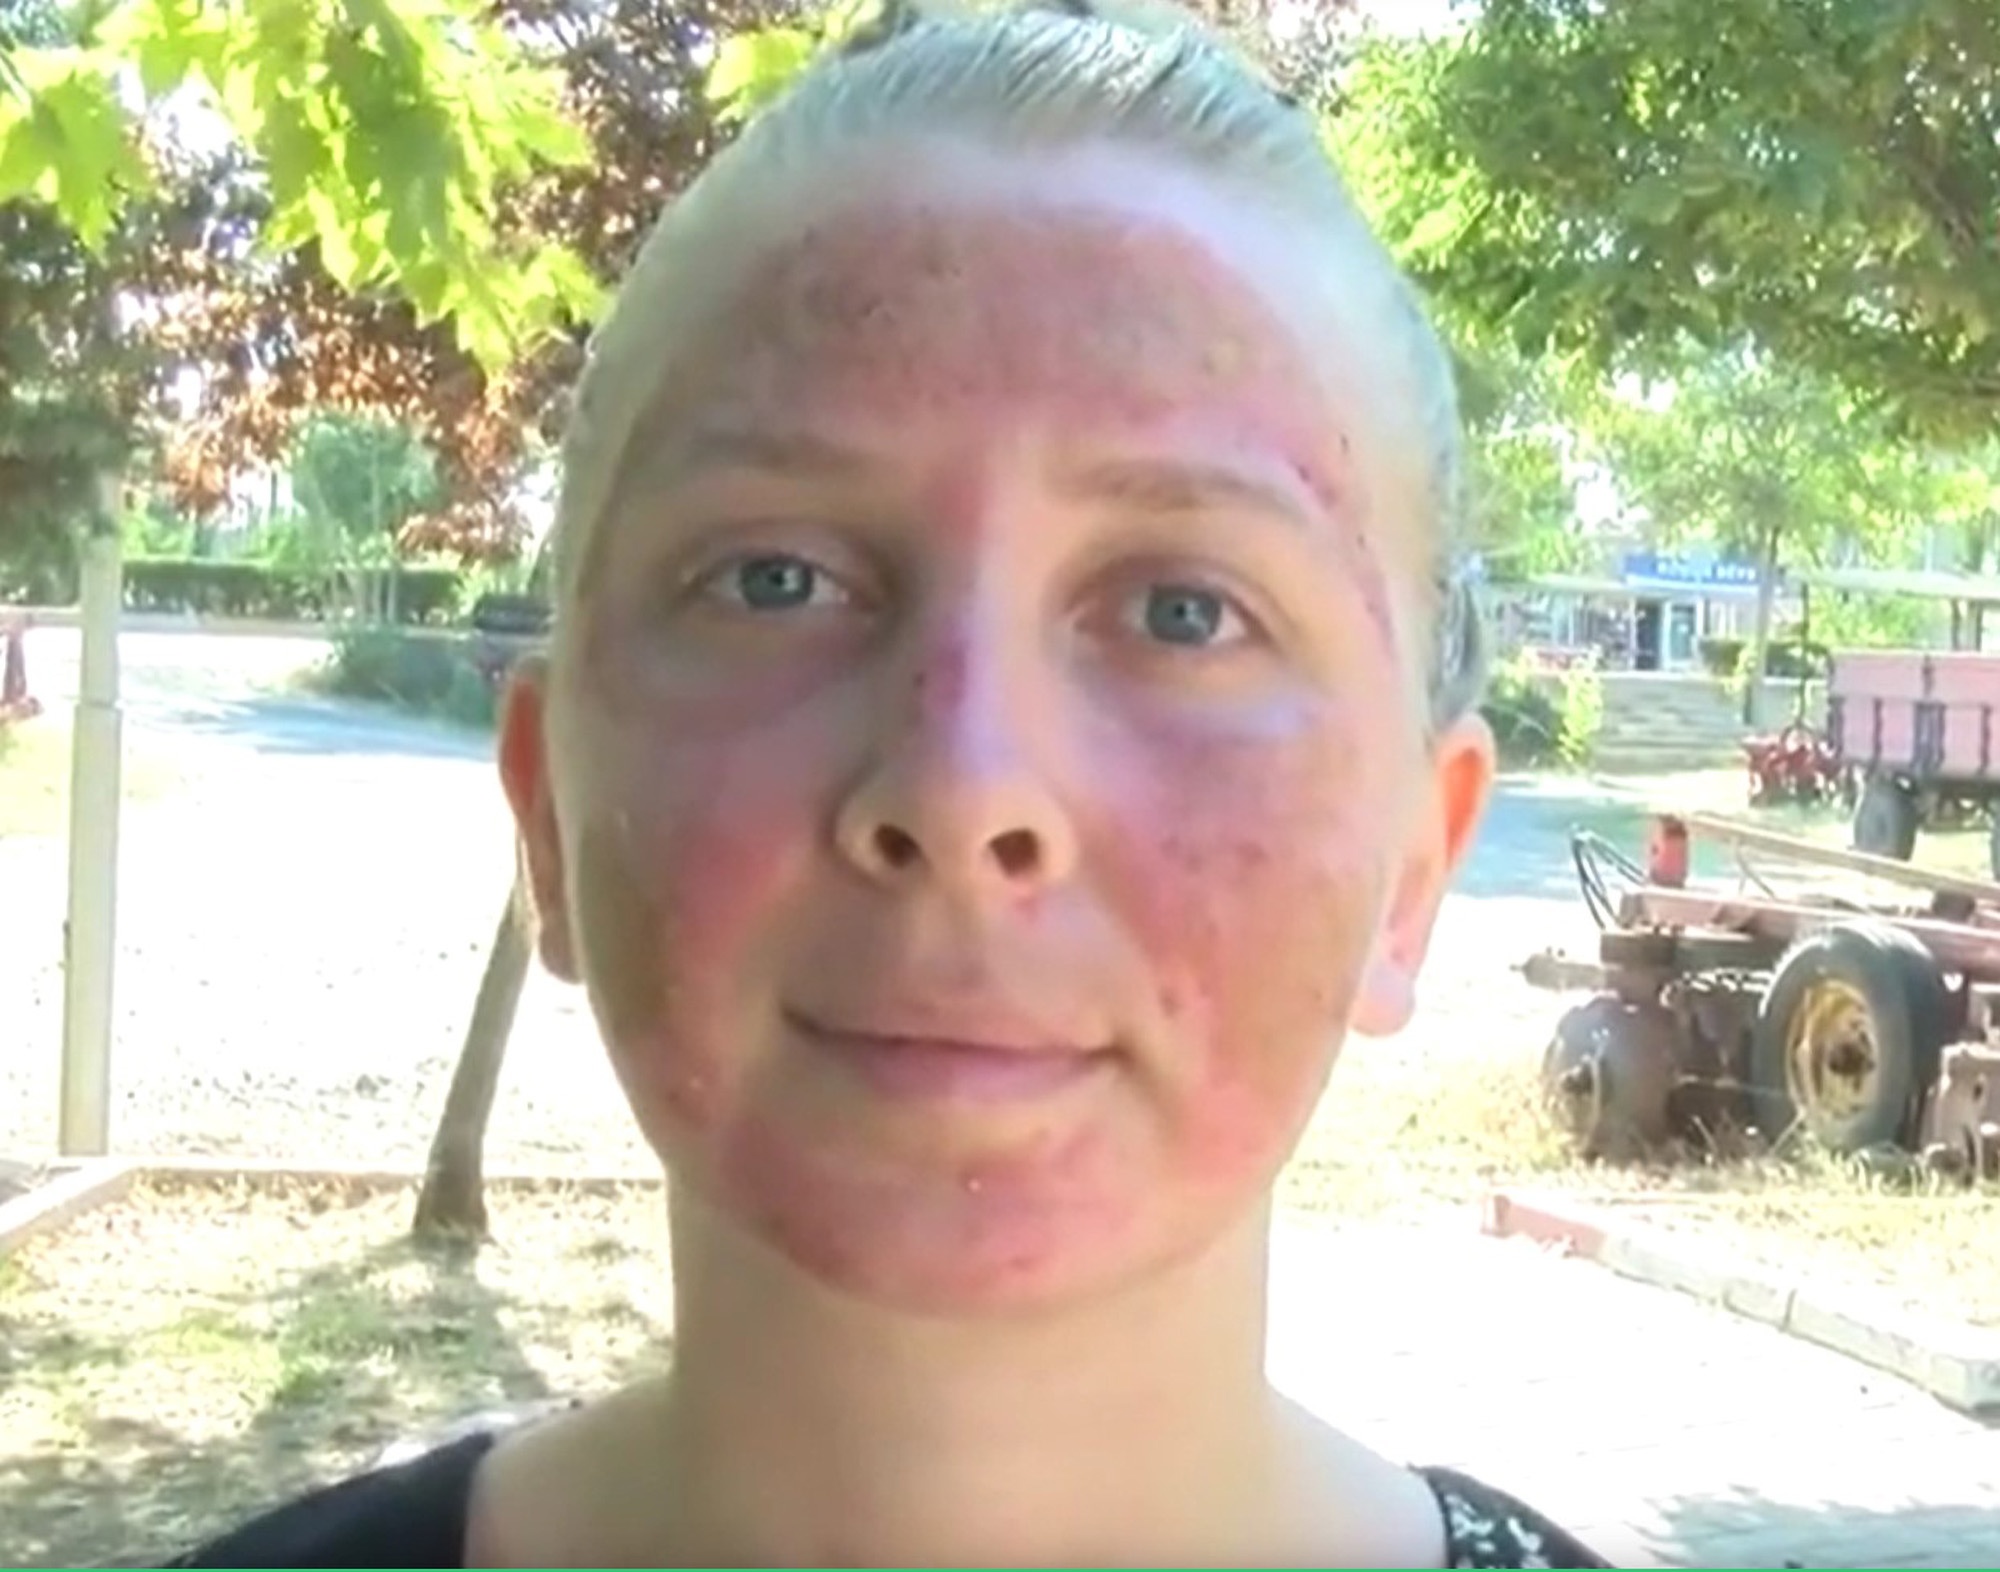 chemical burn on face from face wash